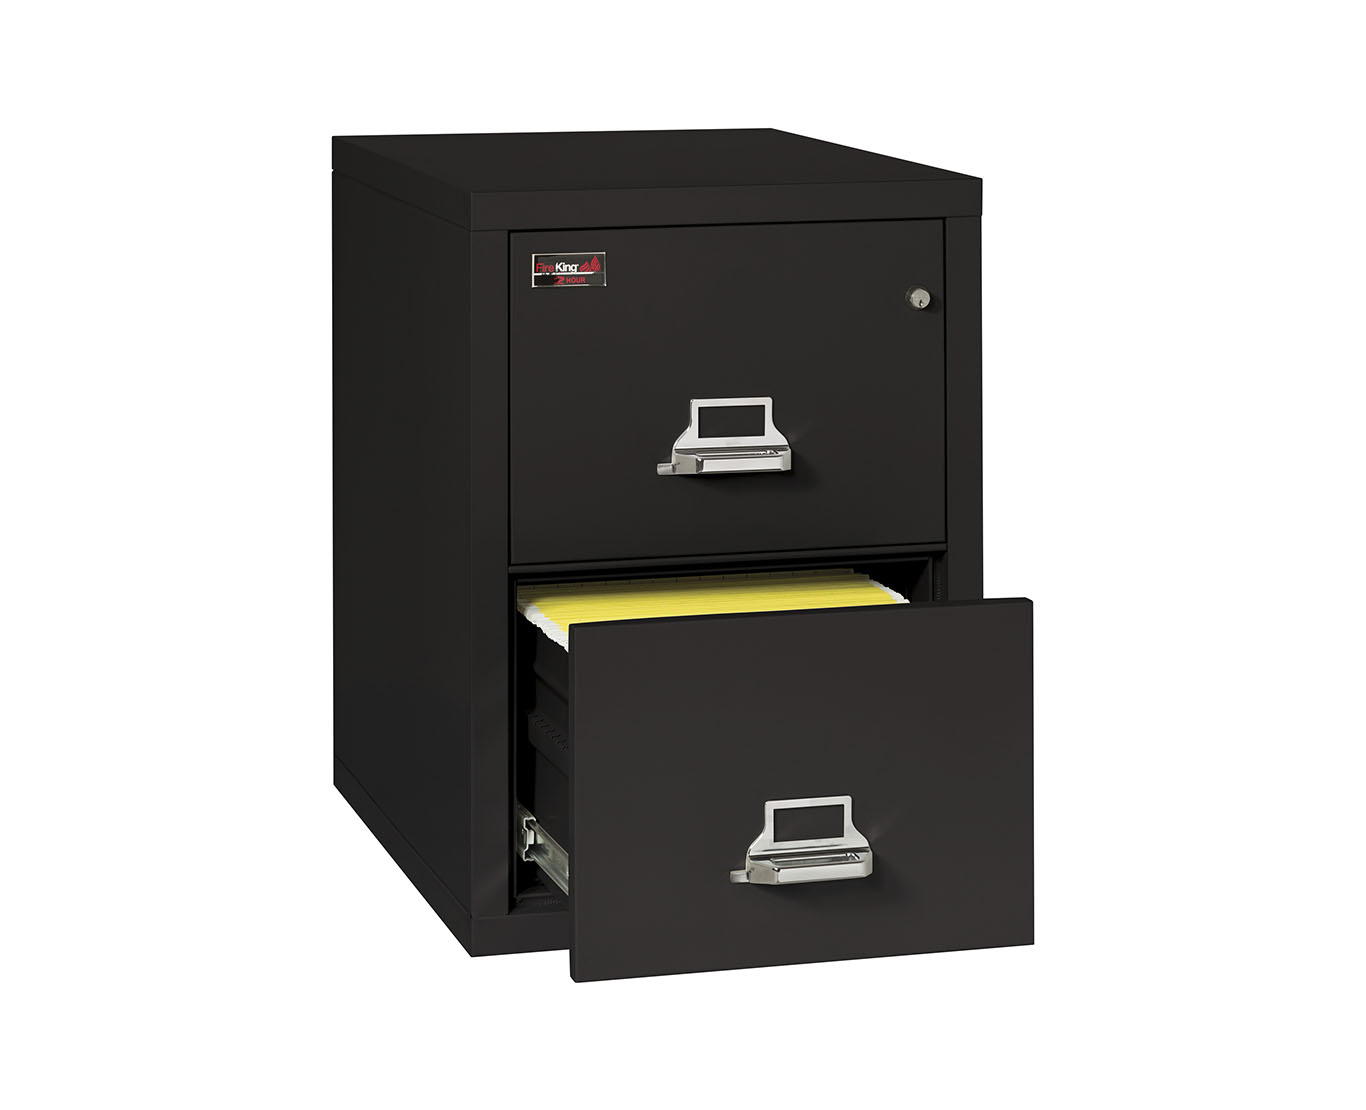 Fireproof File Cabinets 2 Hour Rated Fireking intended for size 1366 X 1110